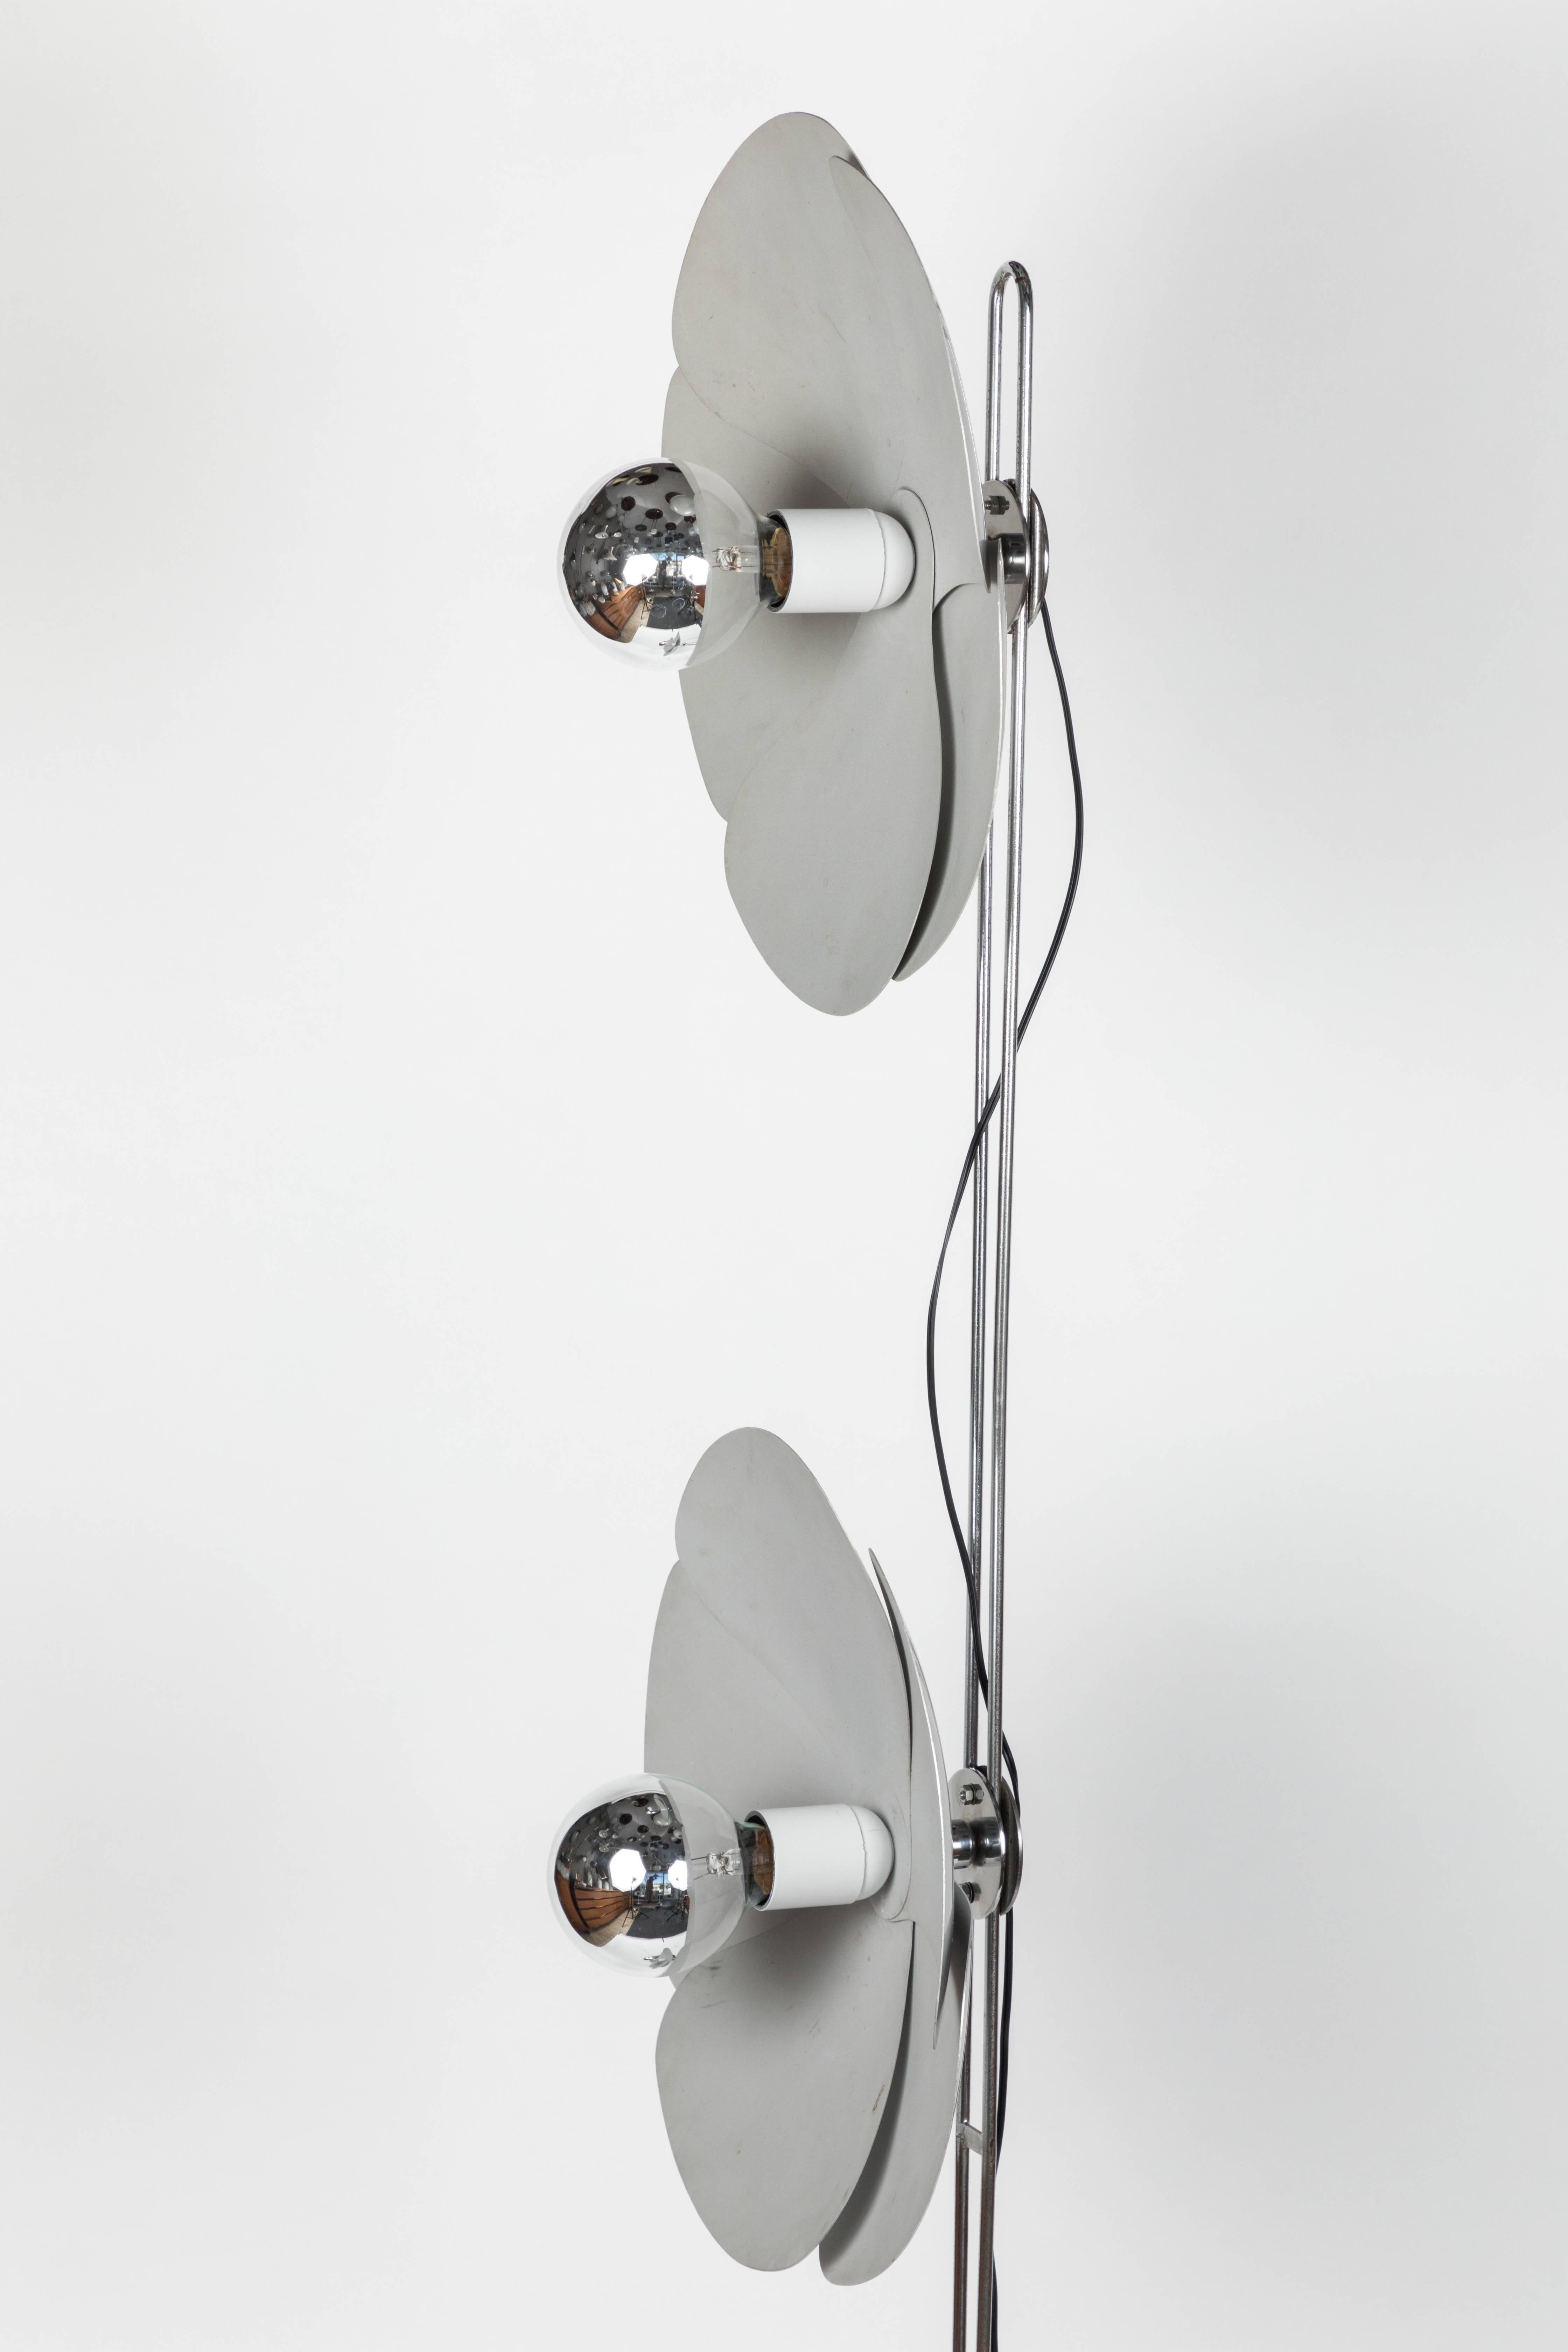 Painted Rare Olivier Mourgue Triple Flower Lamp for Disderot, circa 1970